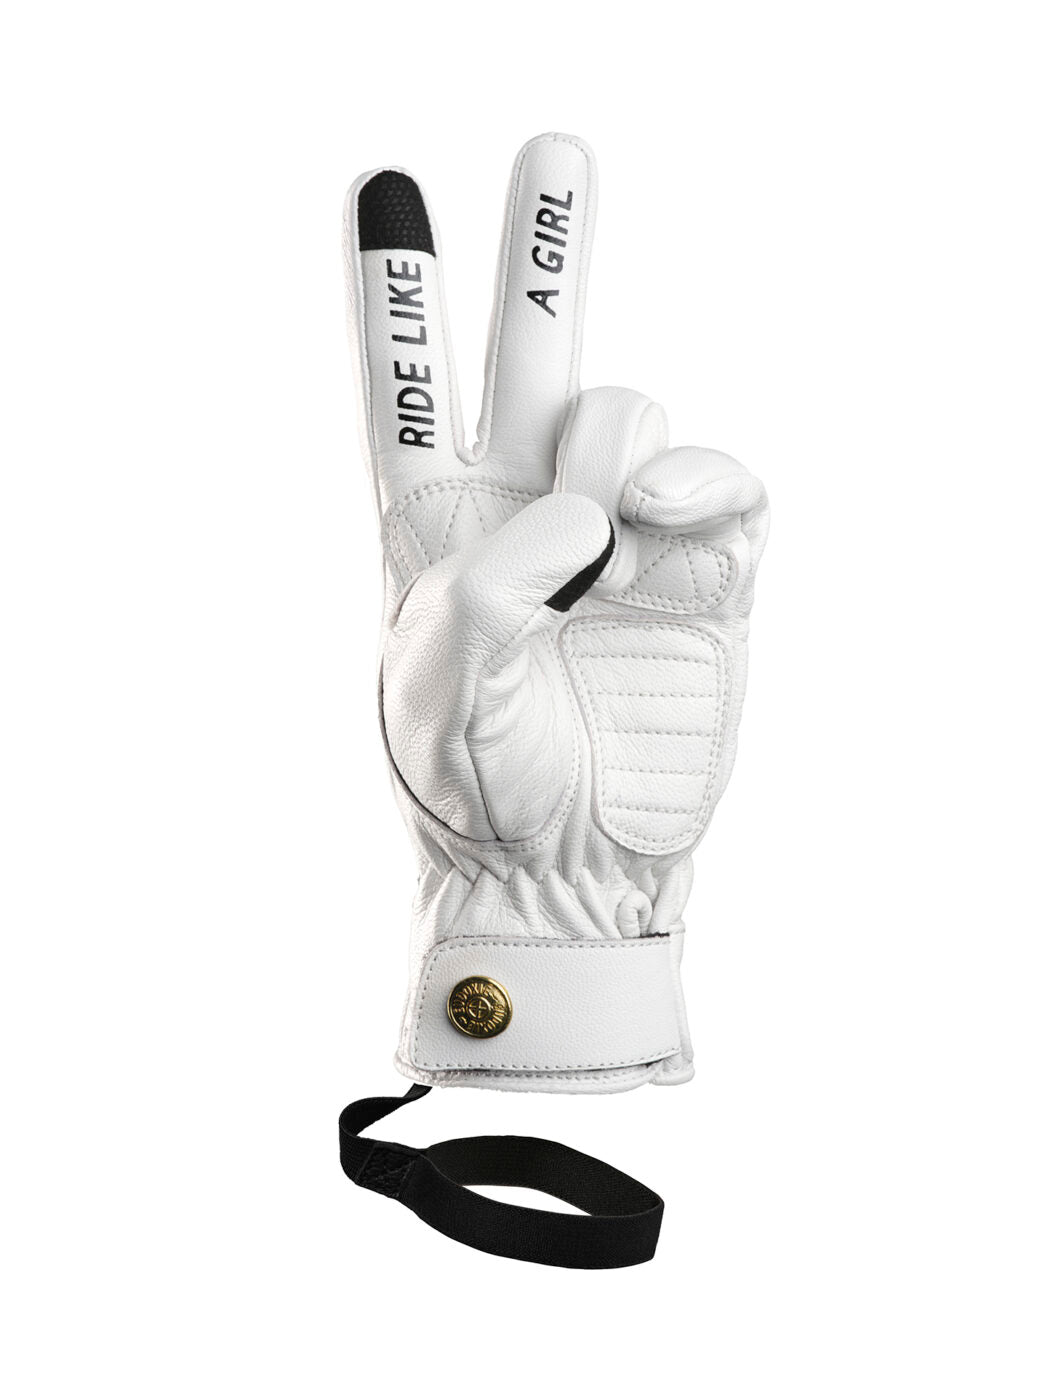 Eudoxie Lizzy CE Gloves White